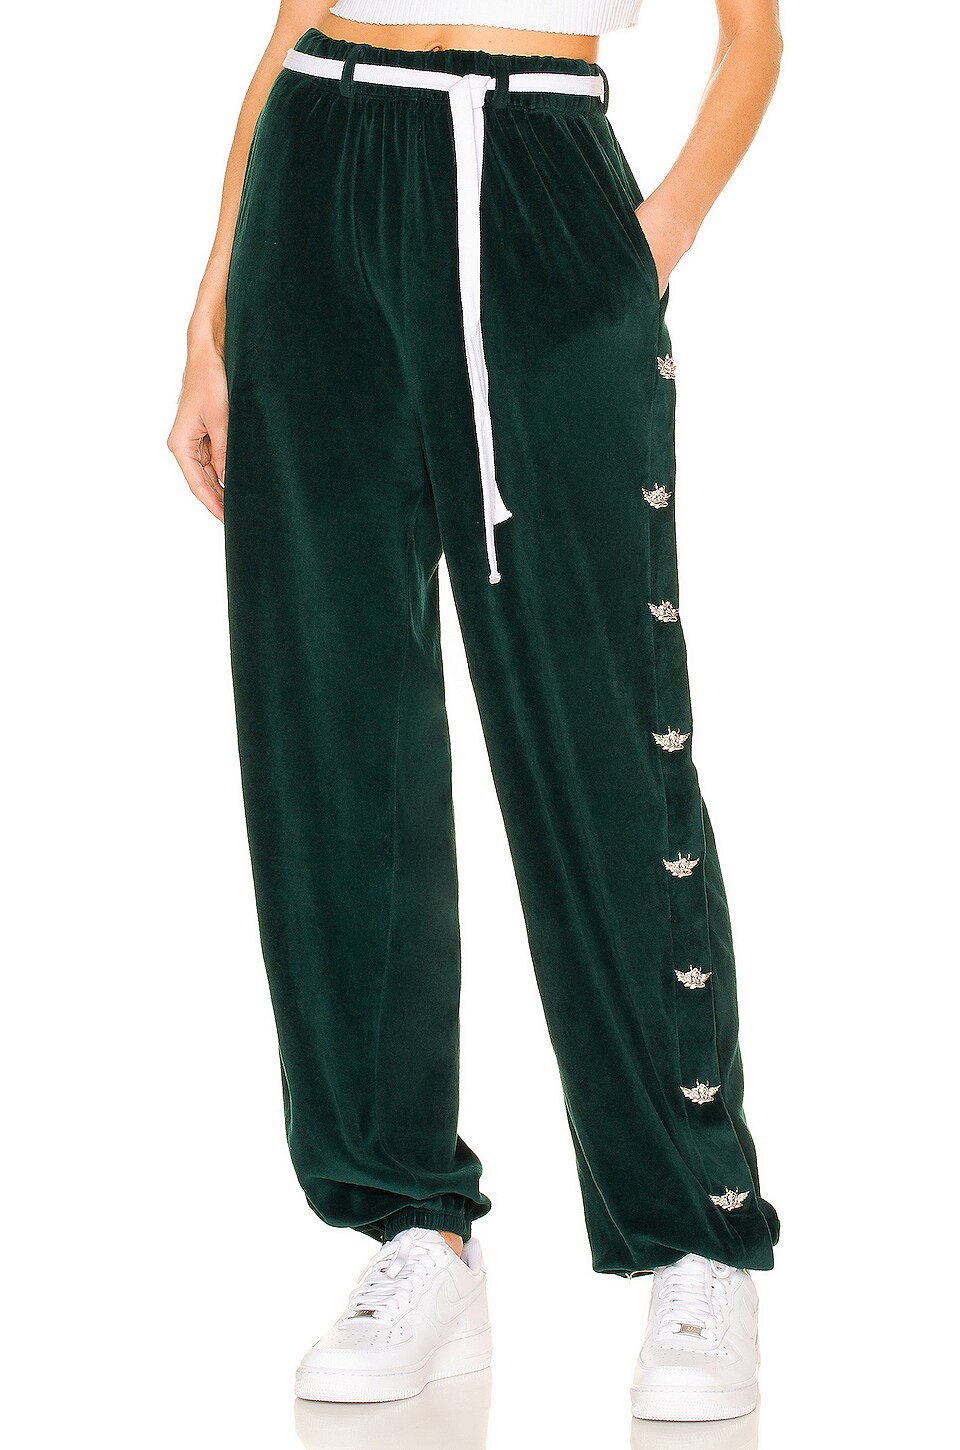 Boys Lie Velour Oh Snap Pants in Emerald | REVOLVE